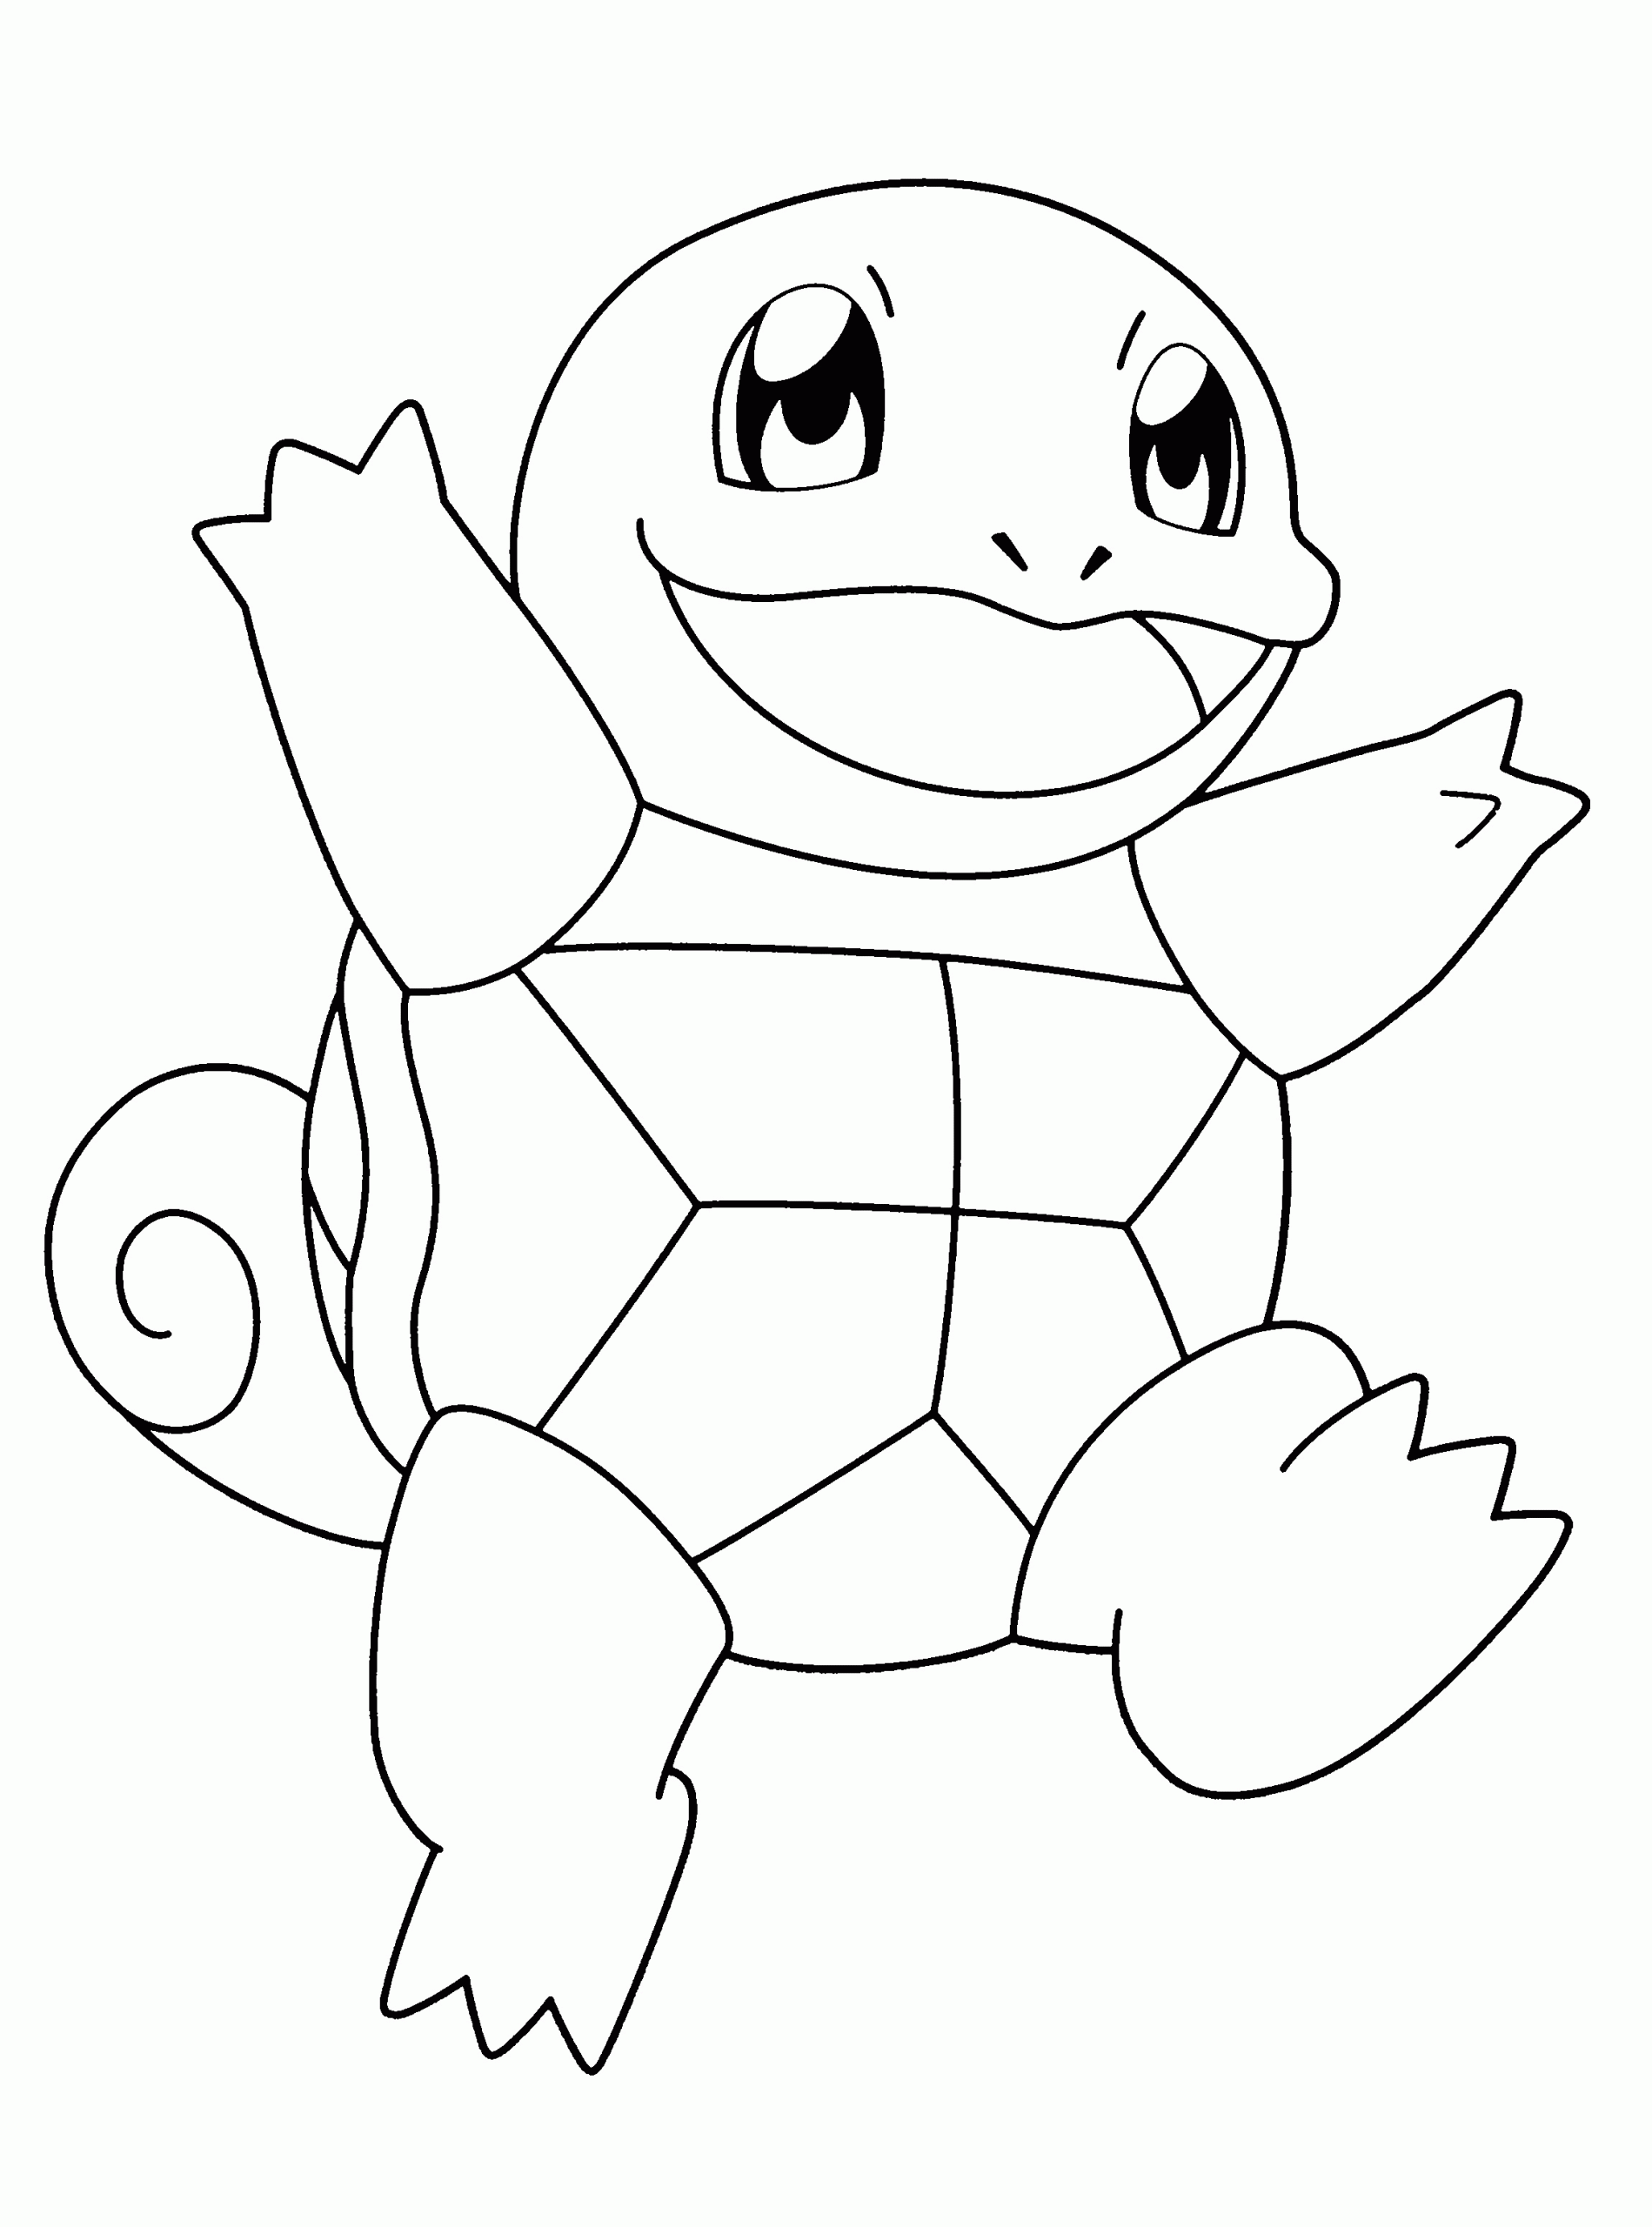 Printable Pokemon Coloring Pages
 Pikachu and Pokemon coloring pages Coloring Pages